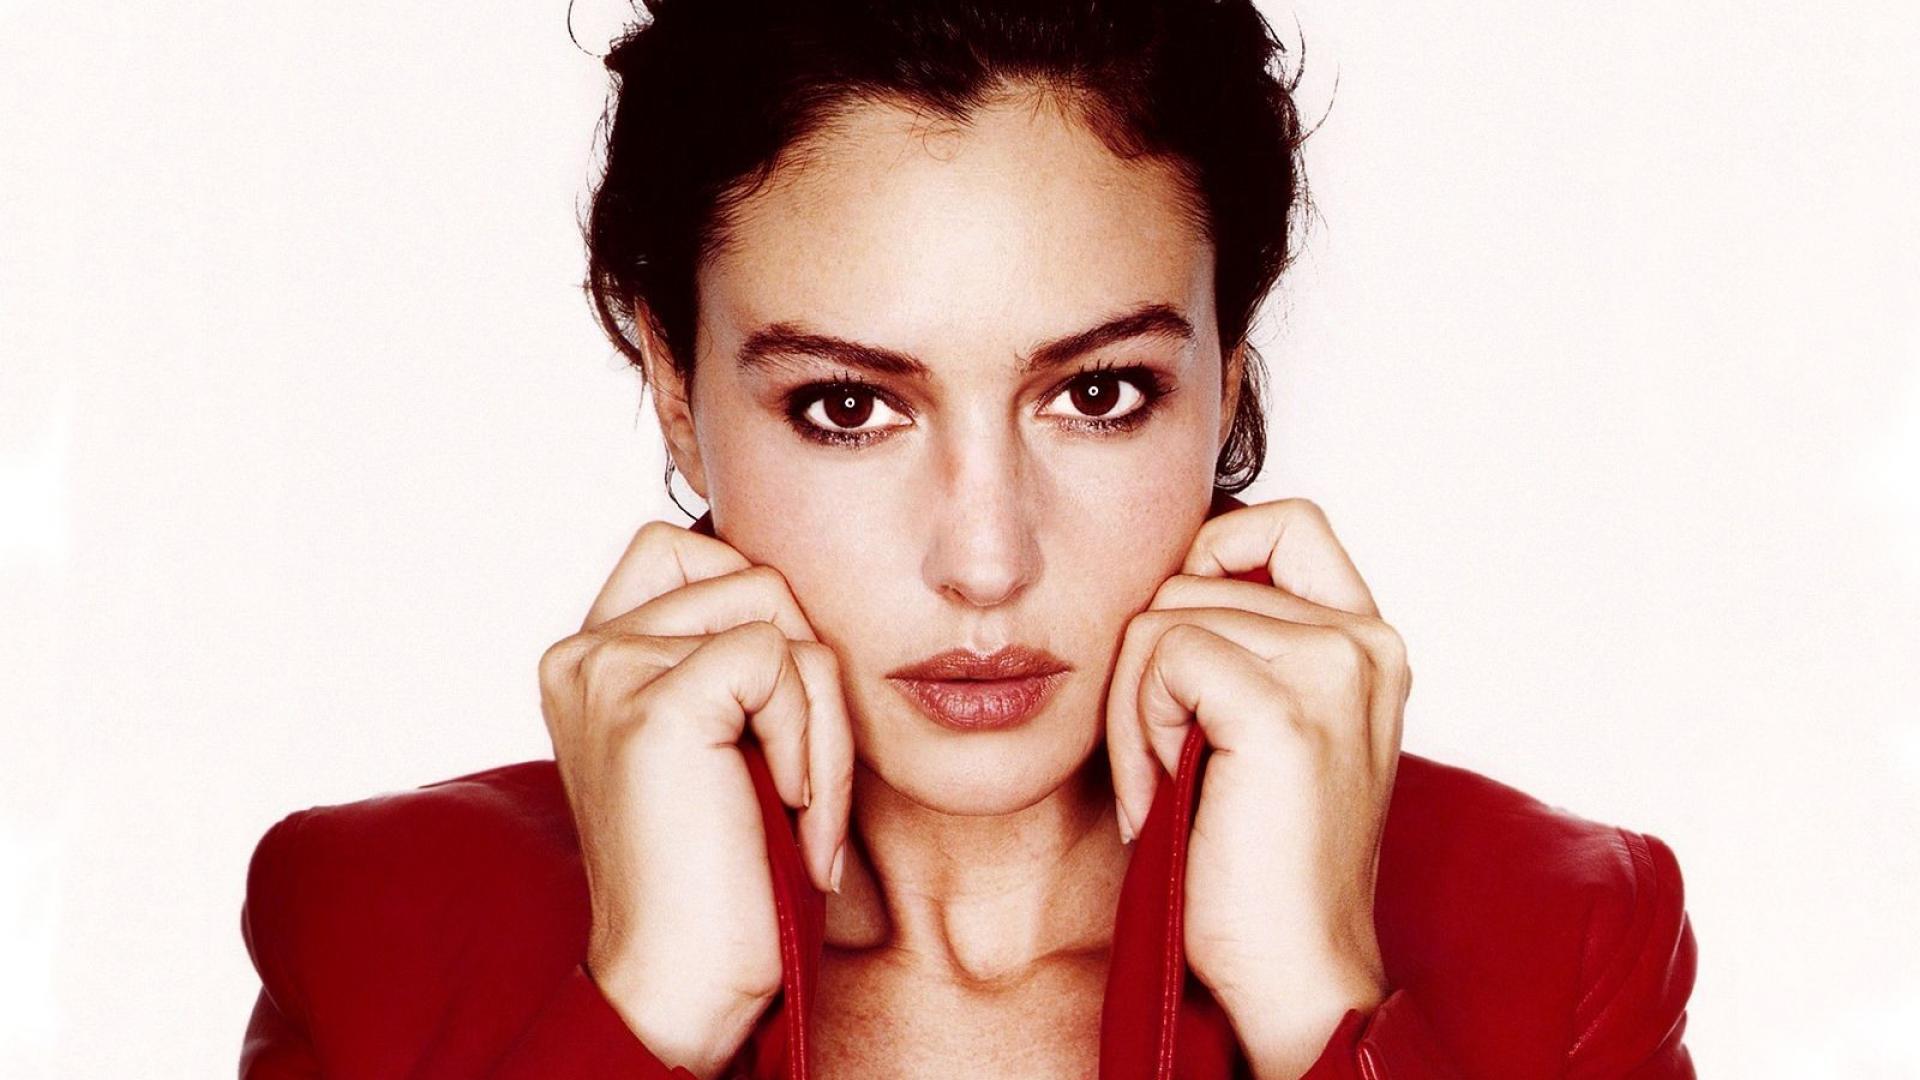 Free Download Monica Bellucci Wallpaper 9496 [1920x1080] For Your Desktop Mobile And Tablet